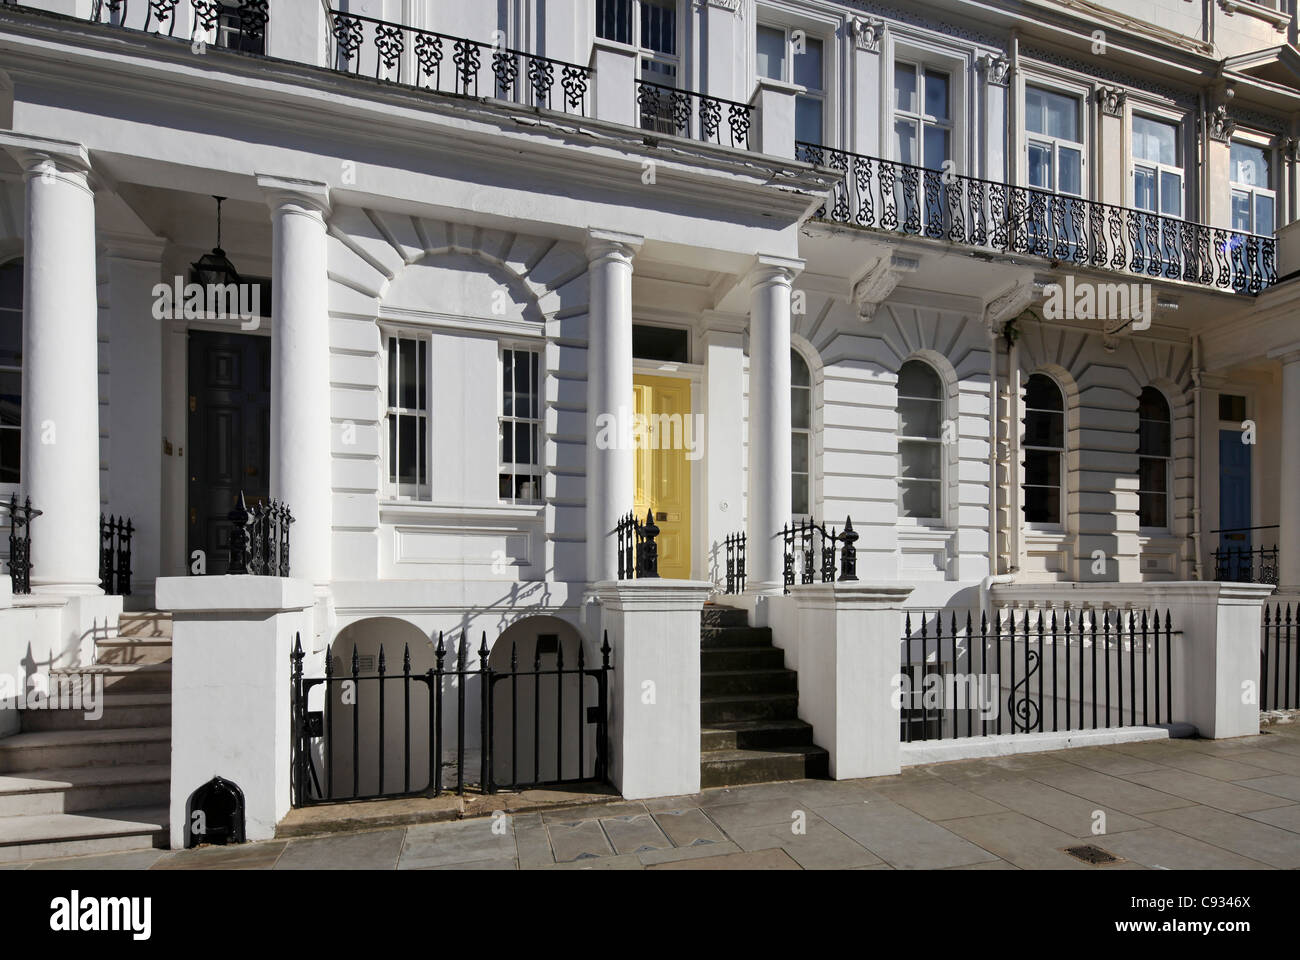 A wealthy street in the neighborhood of Notting Hill in London. Stock Photo